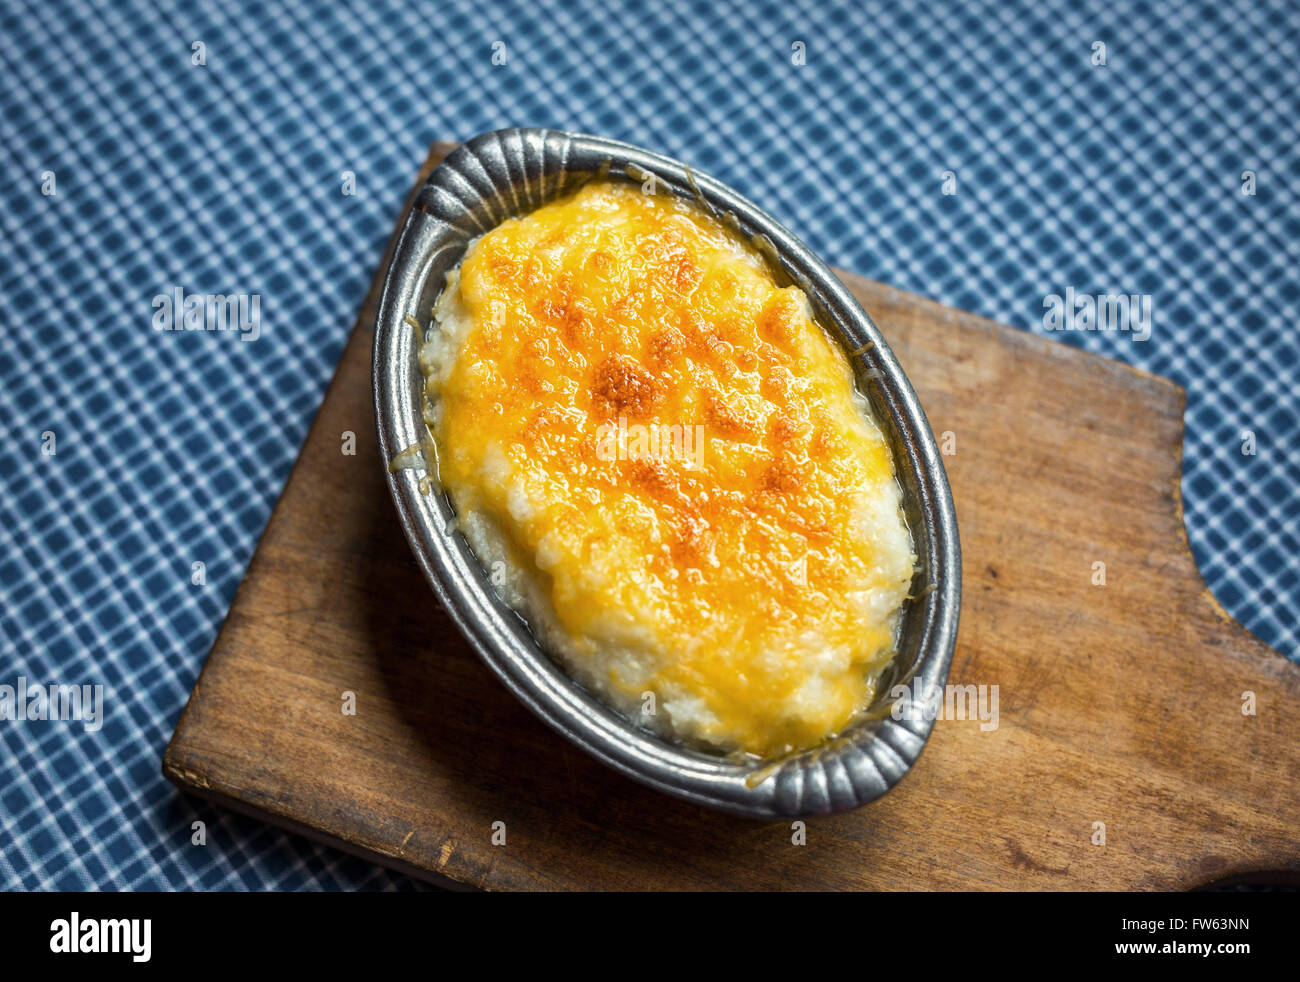 Overhead shot of hominy grits baked with cheddar cheese in a small antique pewter serving bowl. Stock Photo